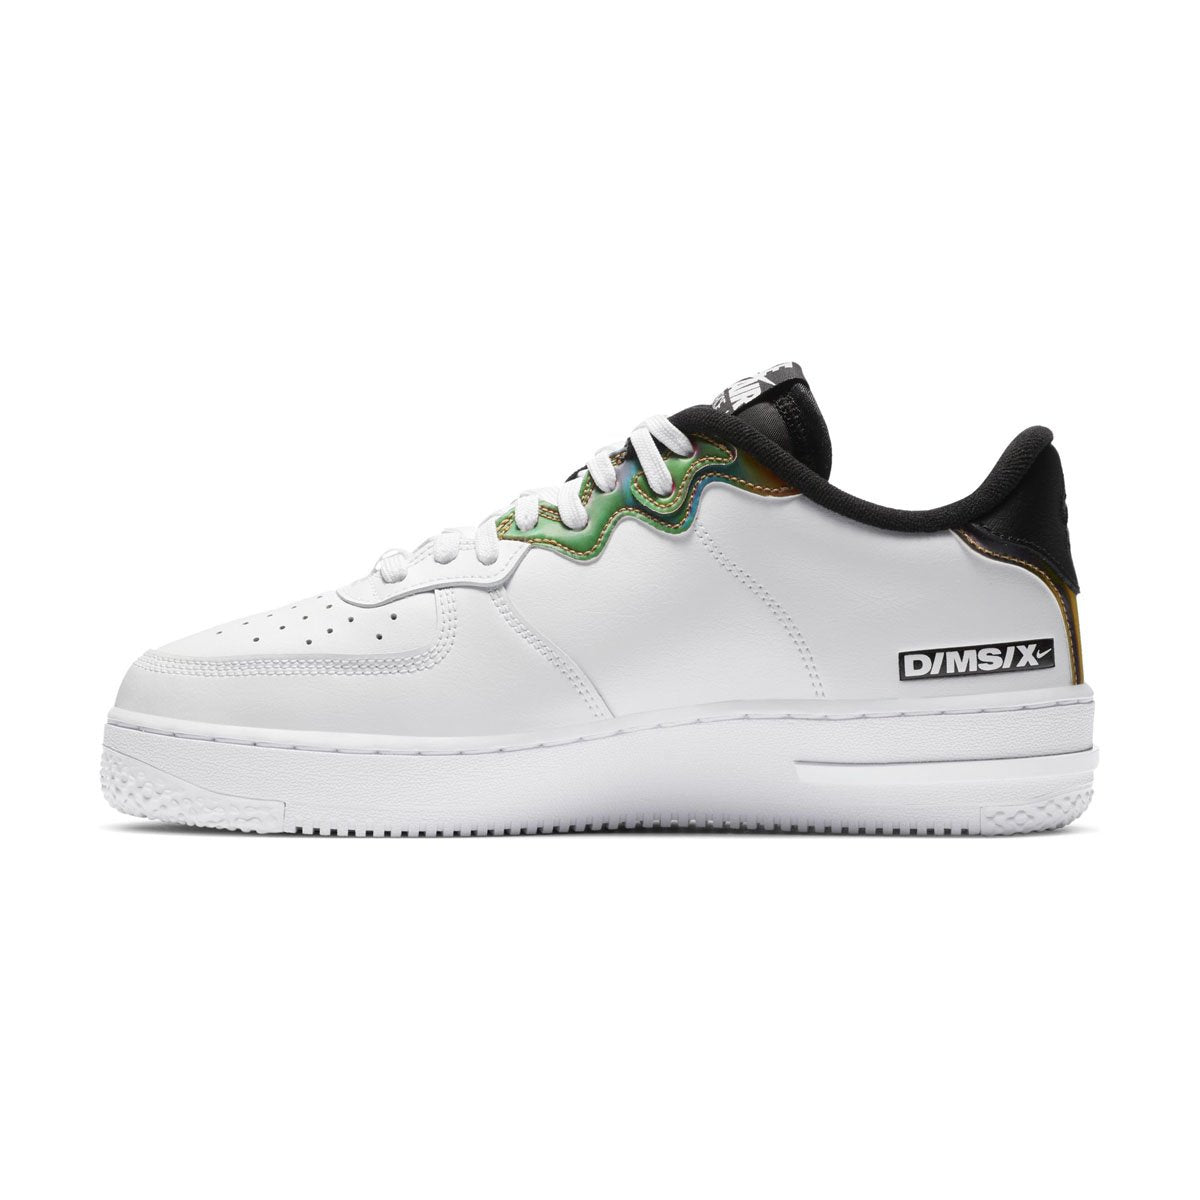 NIKE Air Force 1 '07 LV8 White Reflective Swoosh size 13